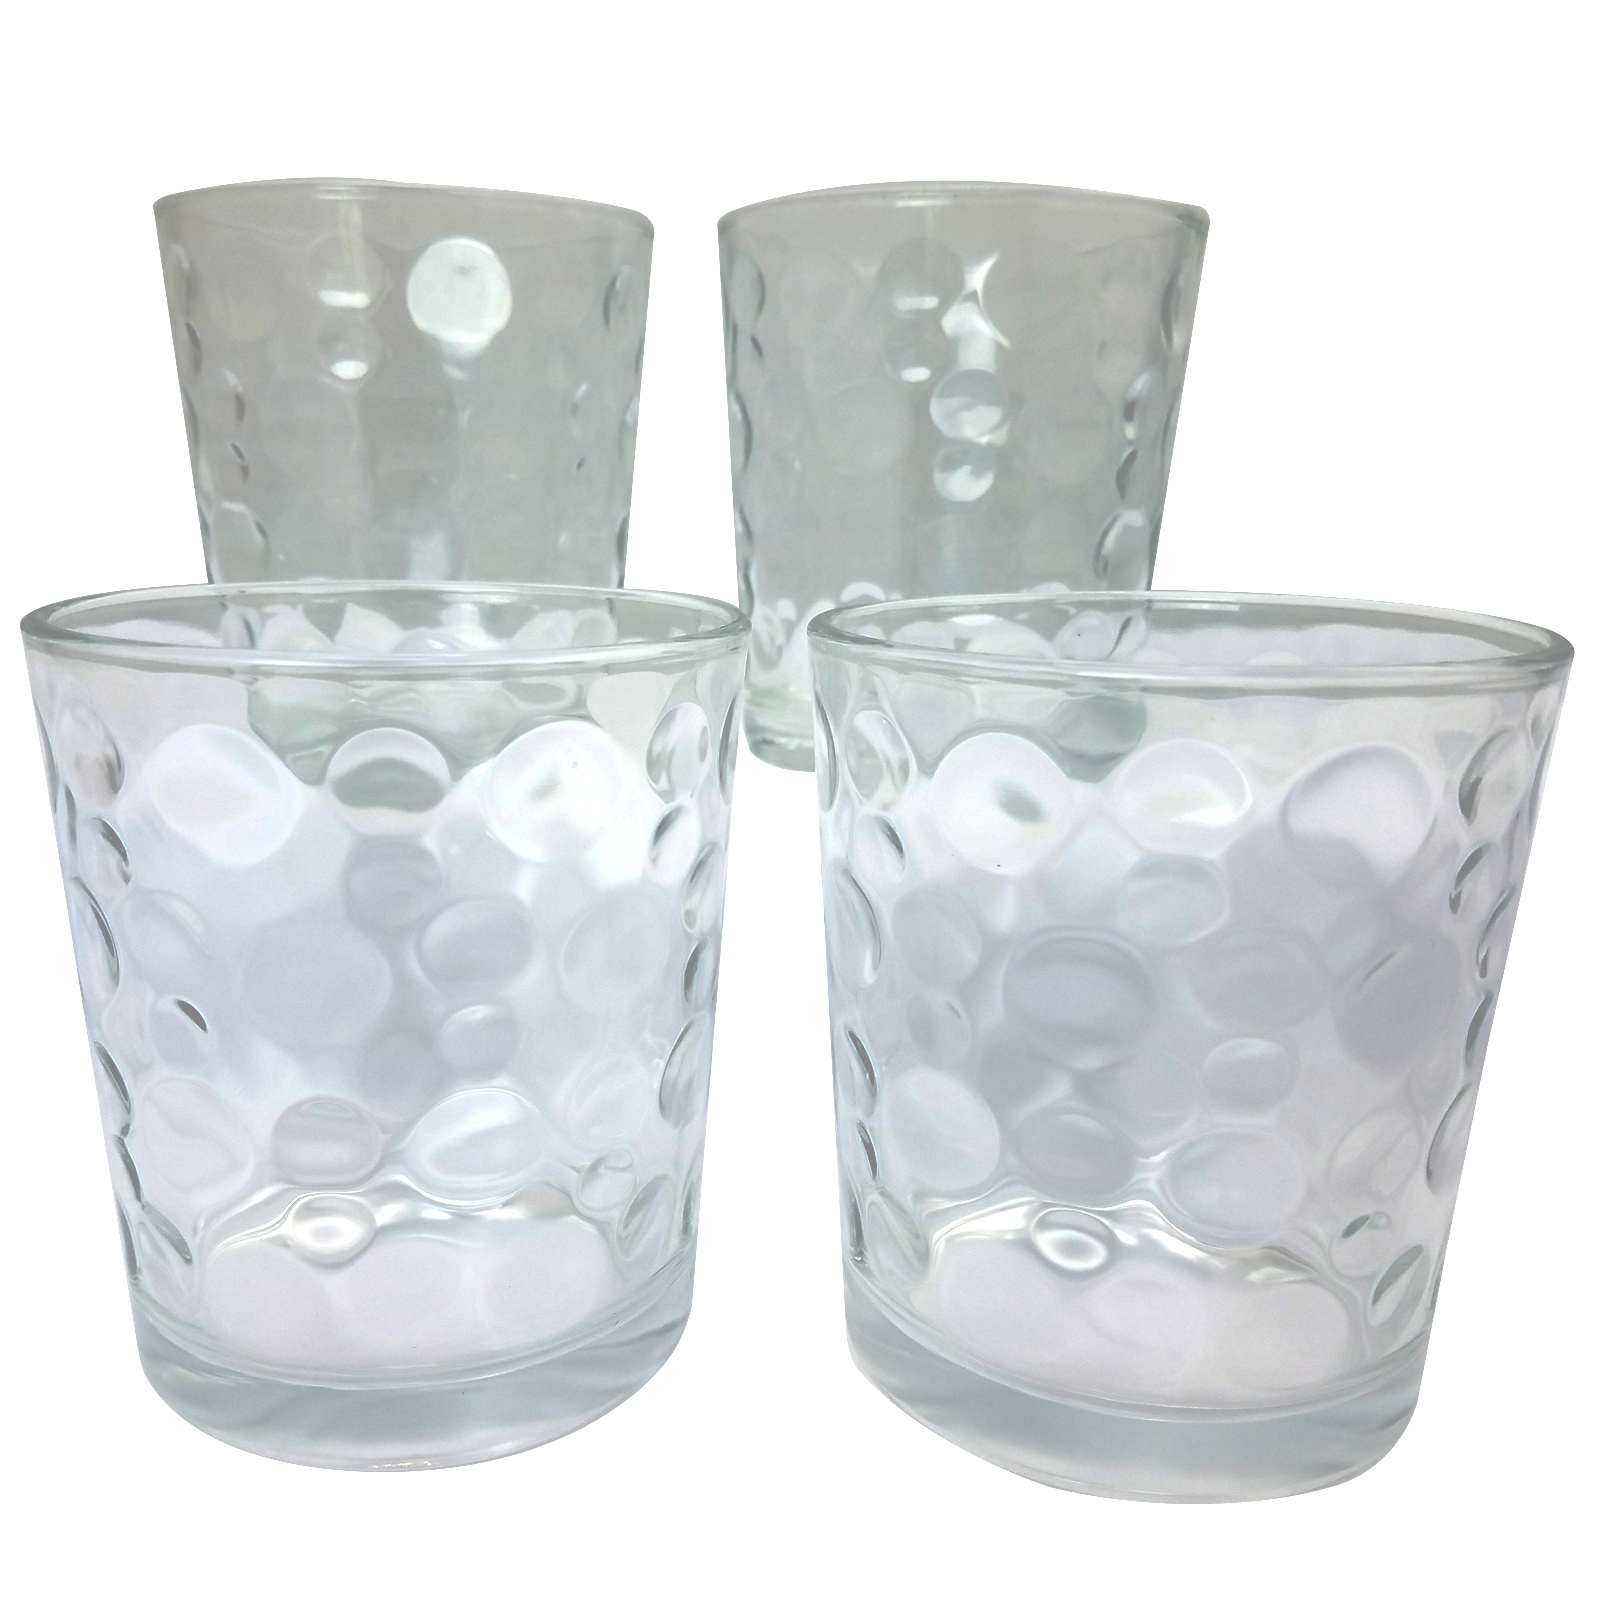 https://ak1.ostkcdn.com/images/products/is/images/direct/c6f0d278061e9a08ad6d943de2c3b5cbea2600d8/Great-Foundations-4-Piece-13-oz-Clear-Embossed-Glass-Set-with-Bubbles-Pattern.jpg